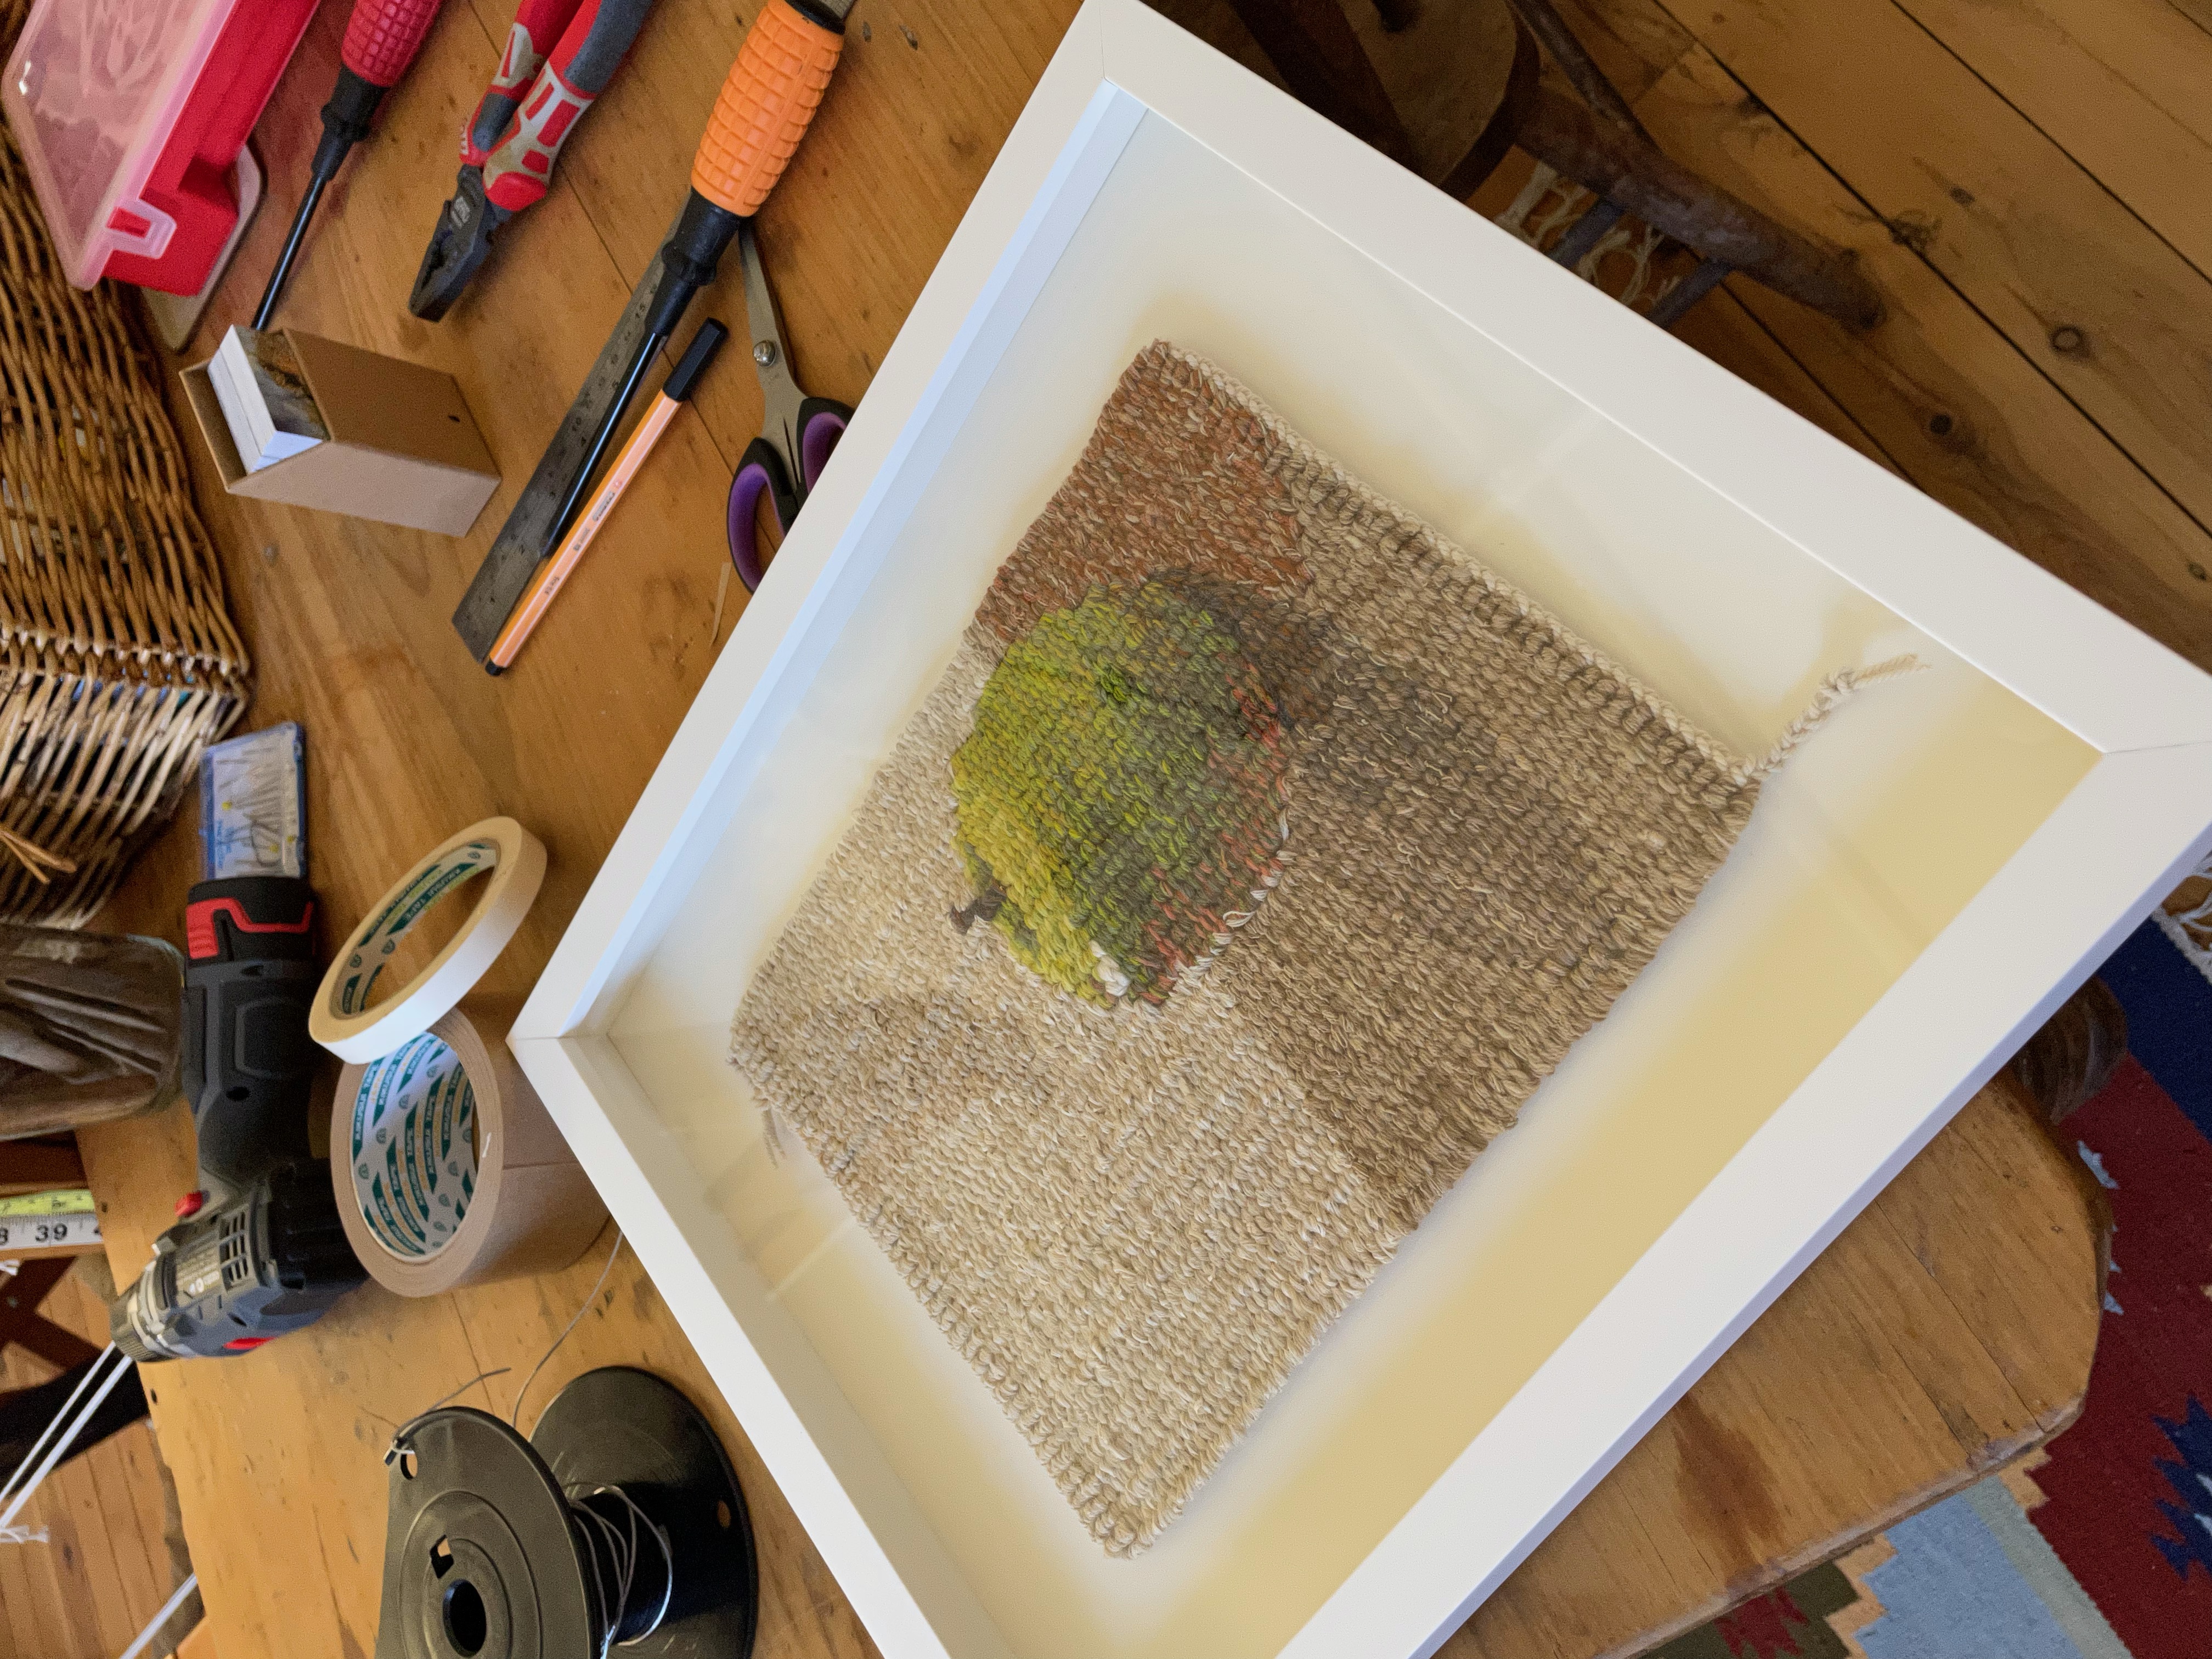 Framing your work with ready made frames